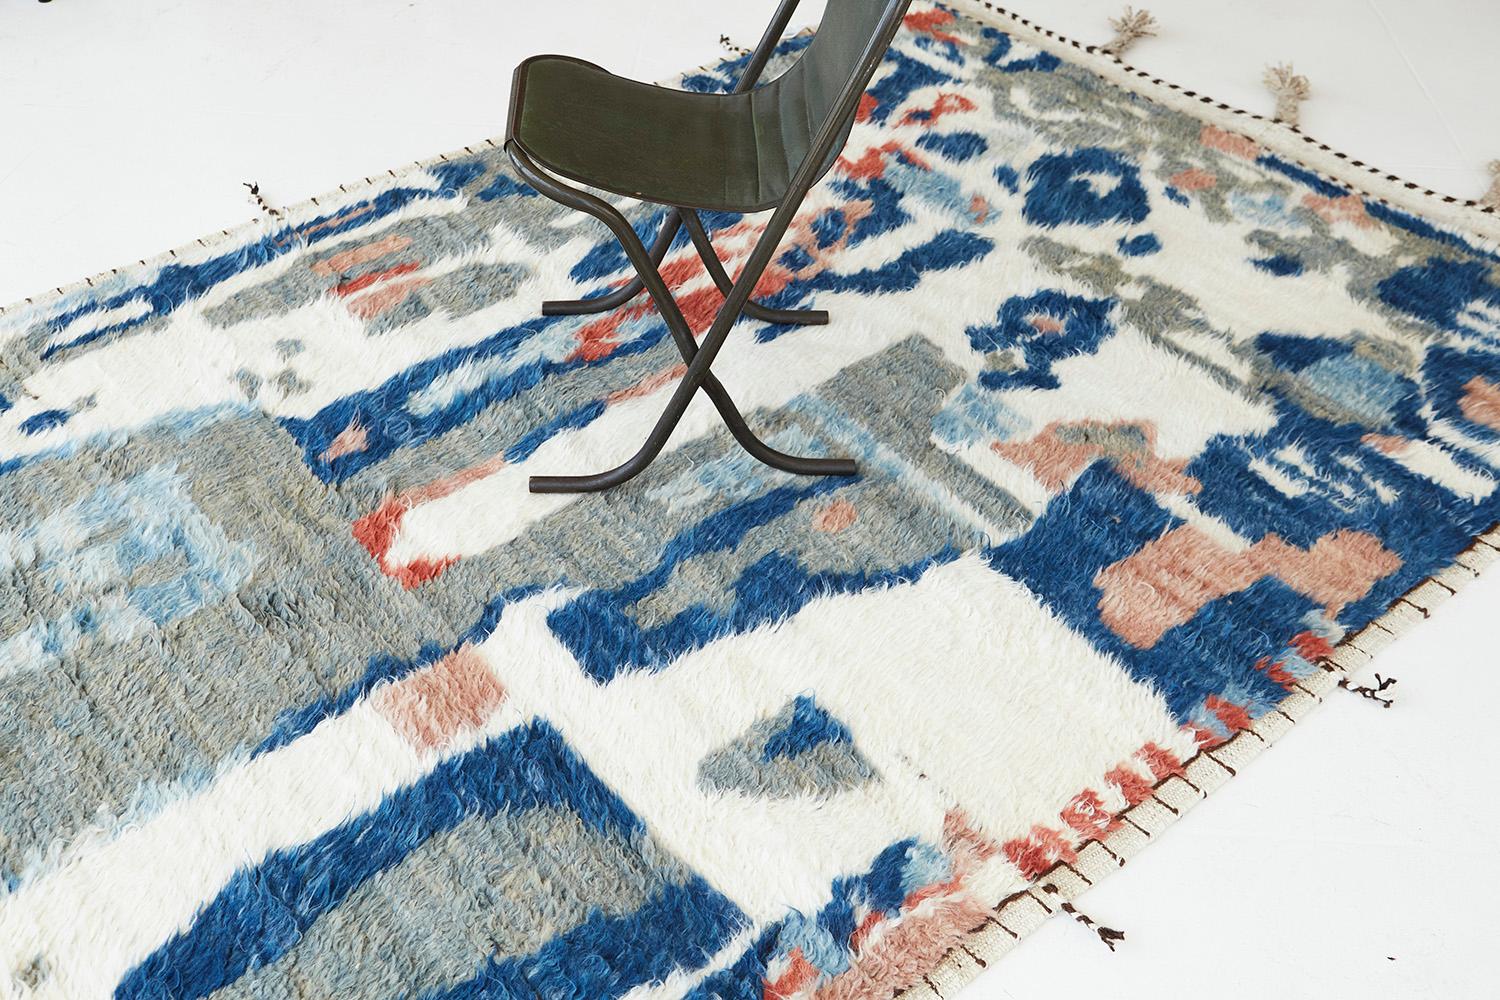 Tazekka' is made of luxurious wool and is made of timeless design elements. Its weaving of natural earth tones with vibrant colors and unique design is what makes the Atlas Collection so unique and sought after.

Rug Number
30129
Size
5' 9